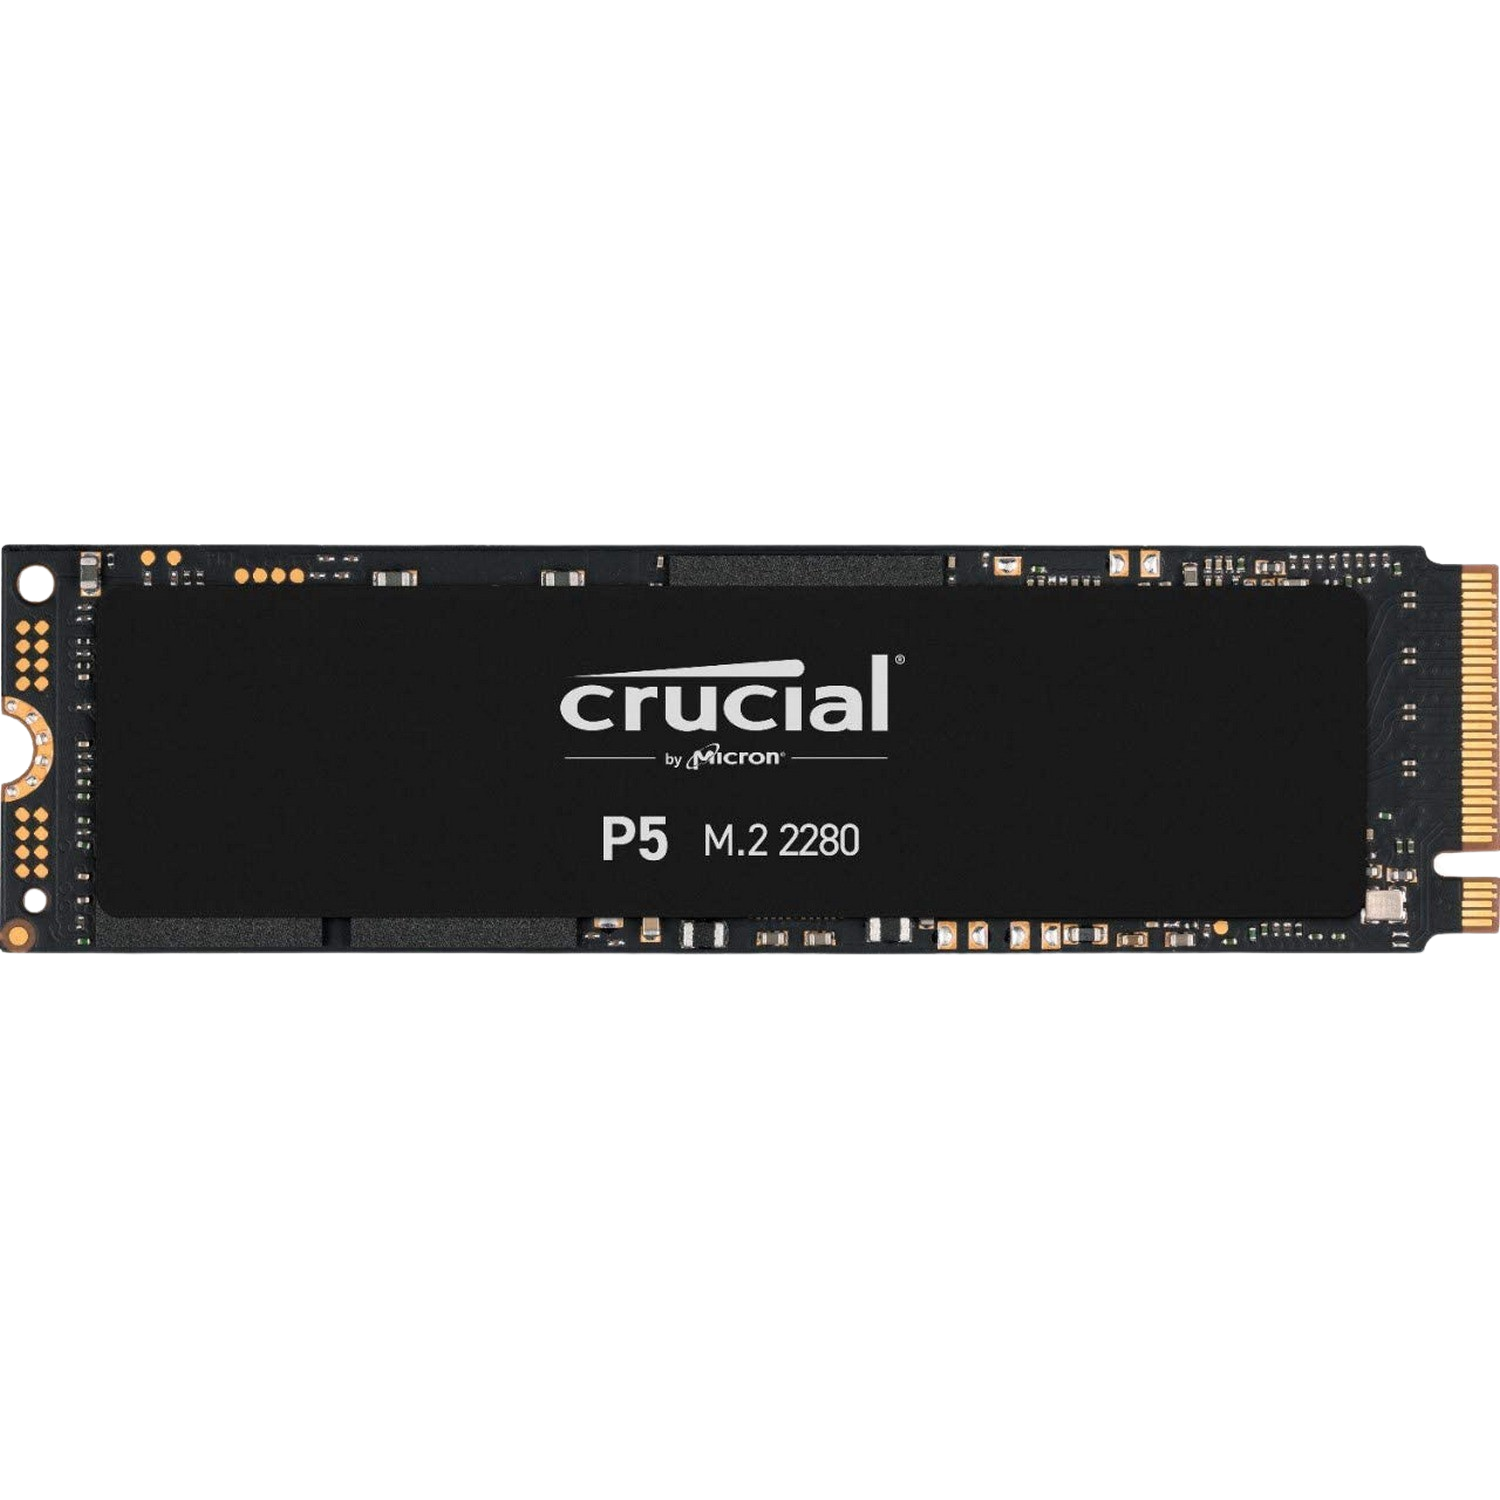 Disco Duro Ssd 500 gb crucial ct500p5ssd8 p5 pcie nvme gen 3 3400 mbs lectura 3000 3d m.2 2280ss 500gb